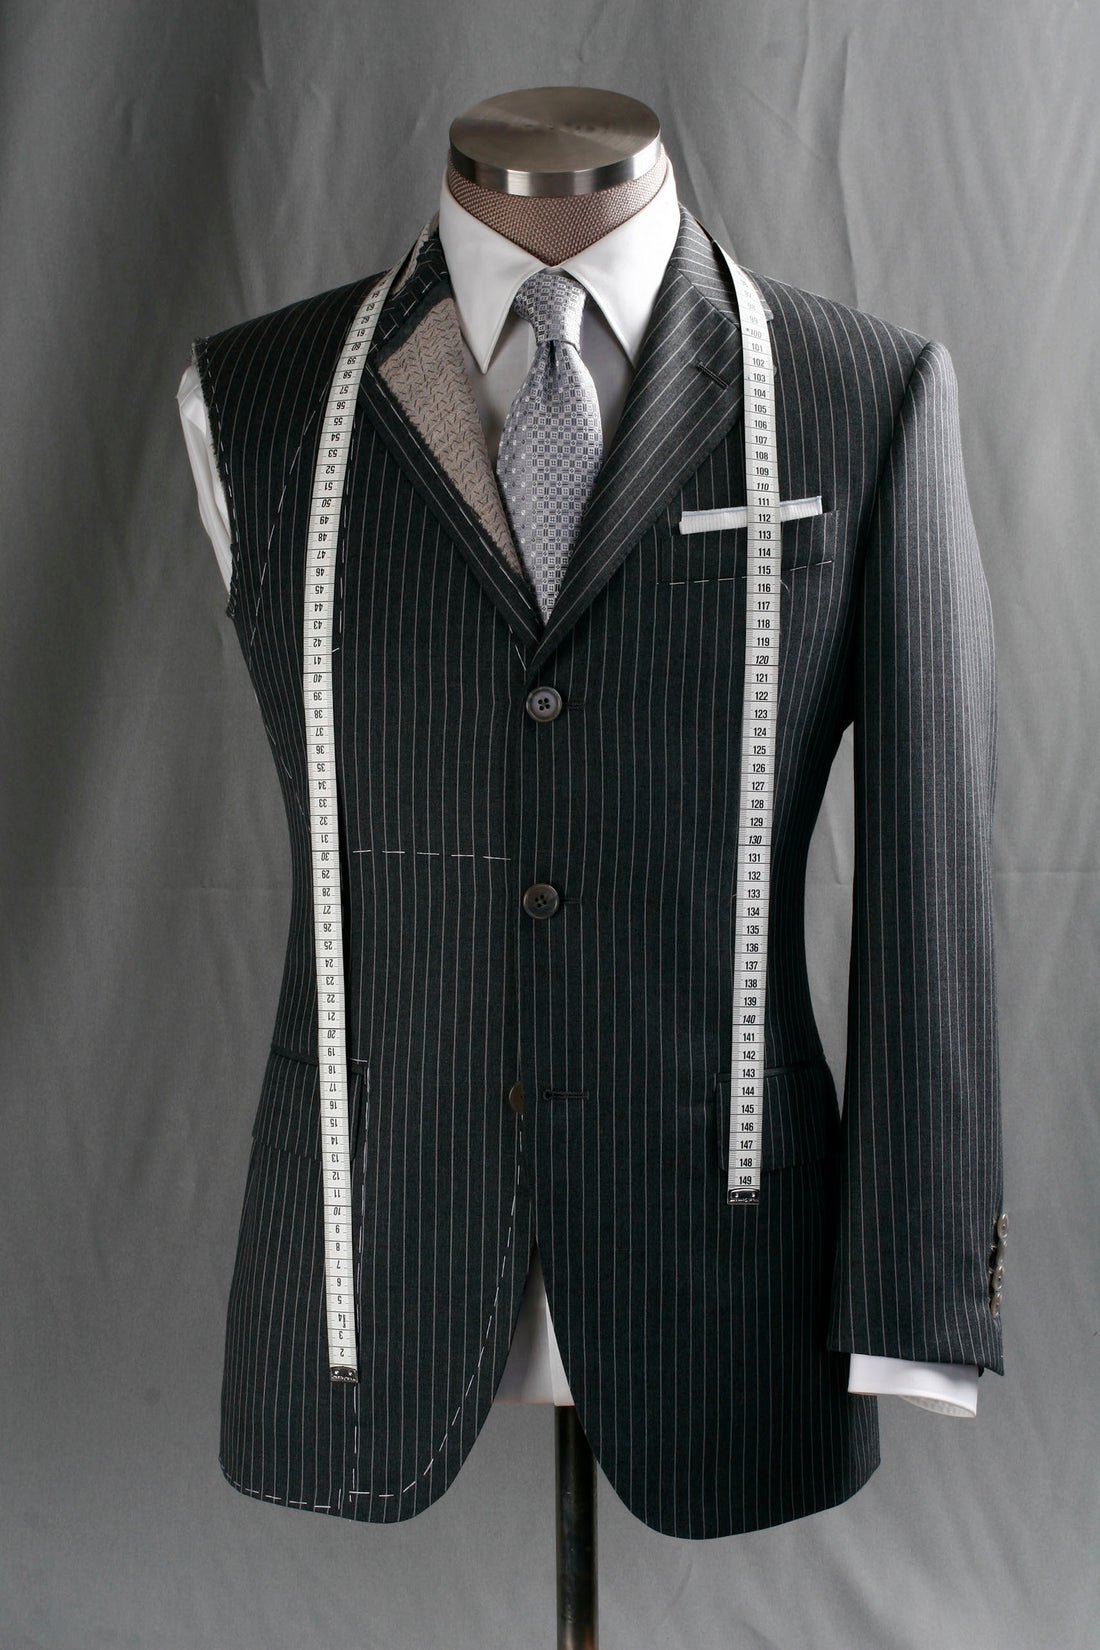 Essential Knowledge for Suit Buyers